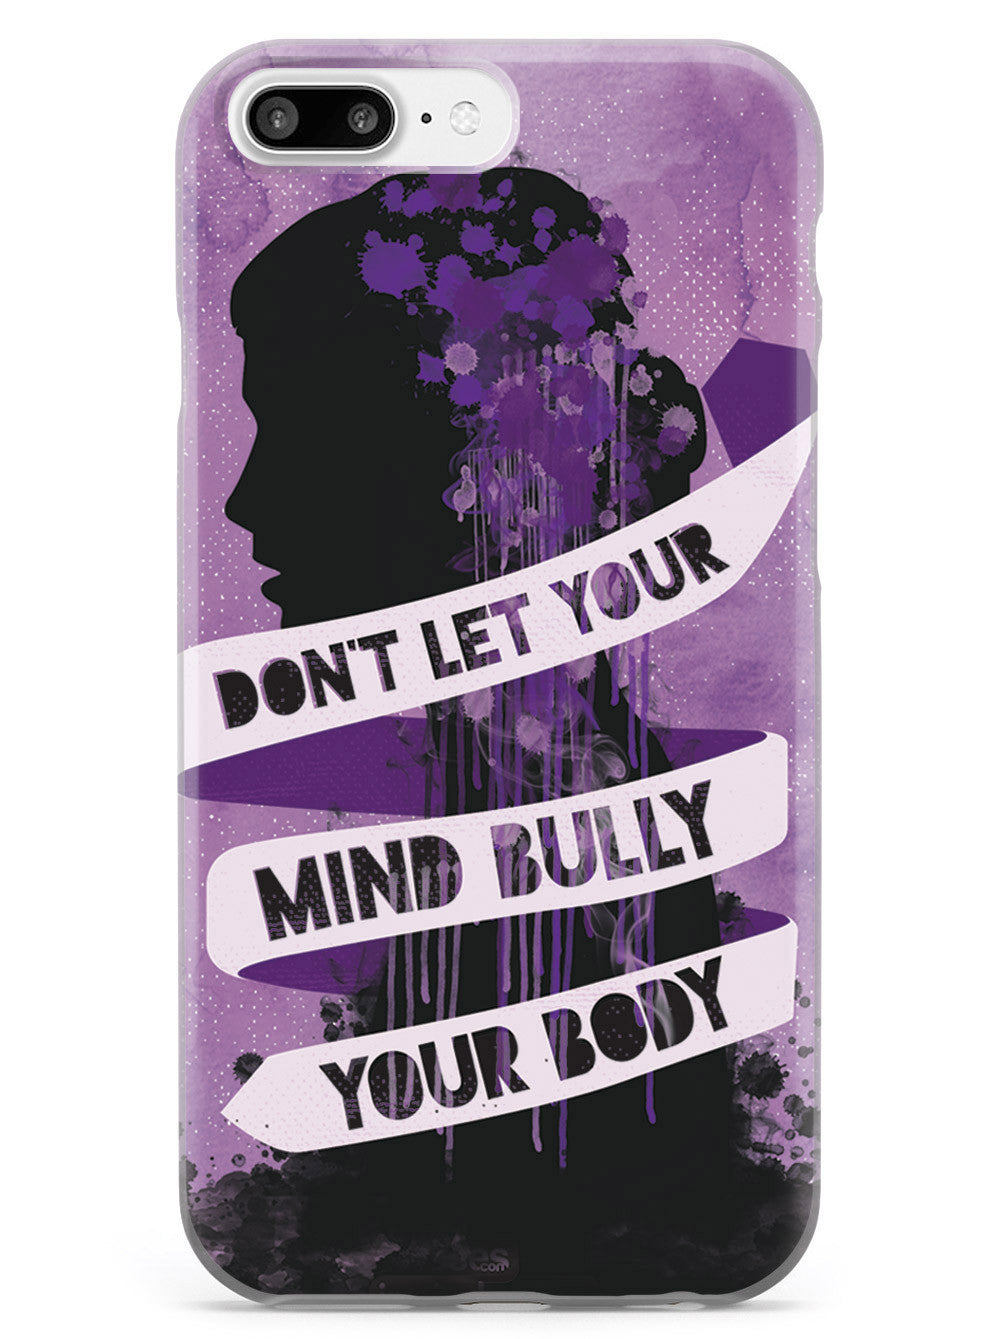 Don't Let Your Mind Bully Your Body Case